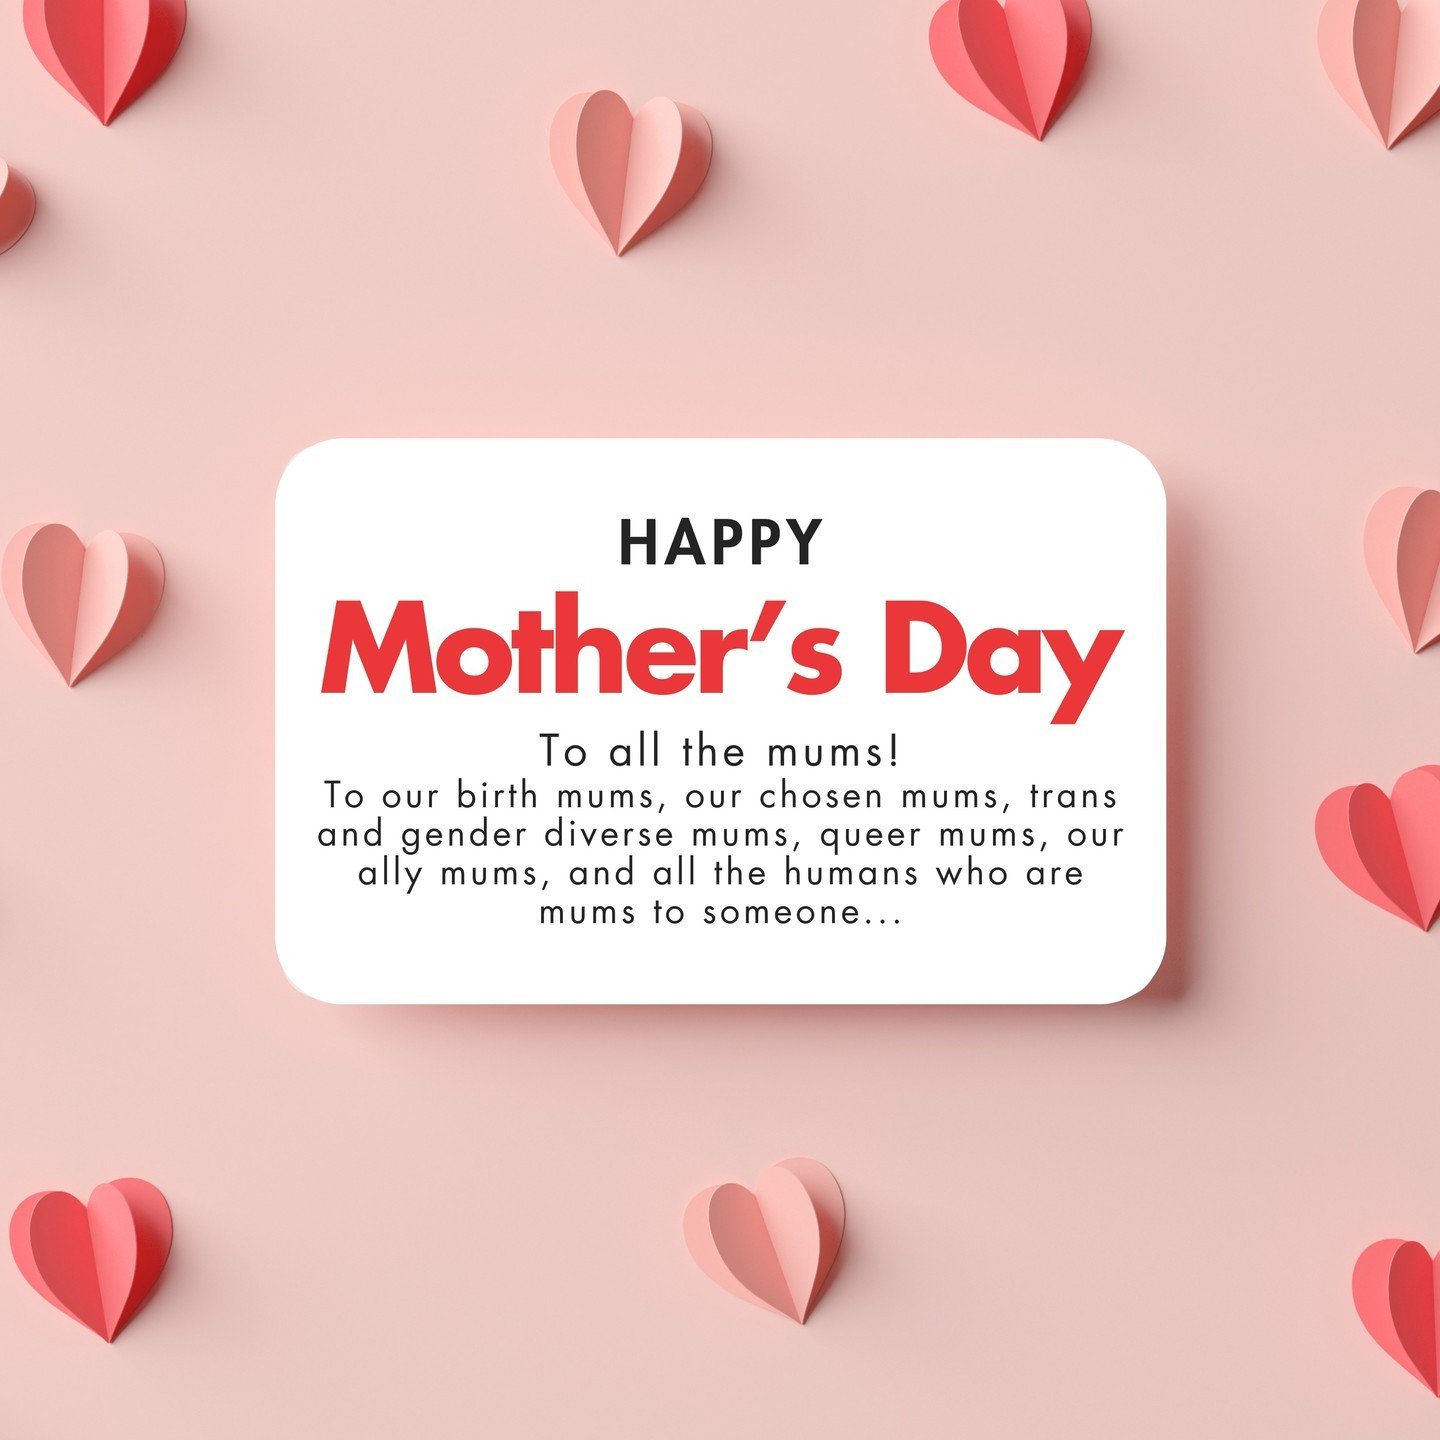 We want to wish the biggest and happiest Mother's Day to all our mums! 
Our birth mums, our chosen mums, trans and gender diverse mums, queer mums, our ally mums, and all the beautiful humans who are mums to someone... Today is for you! 💖 And we wis